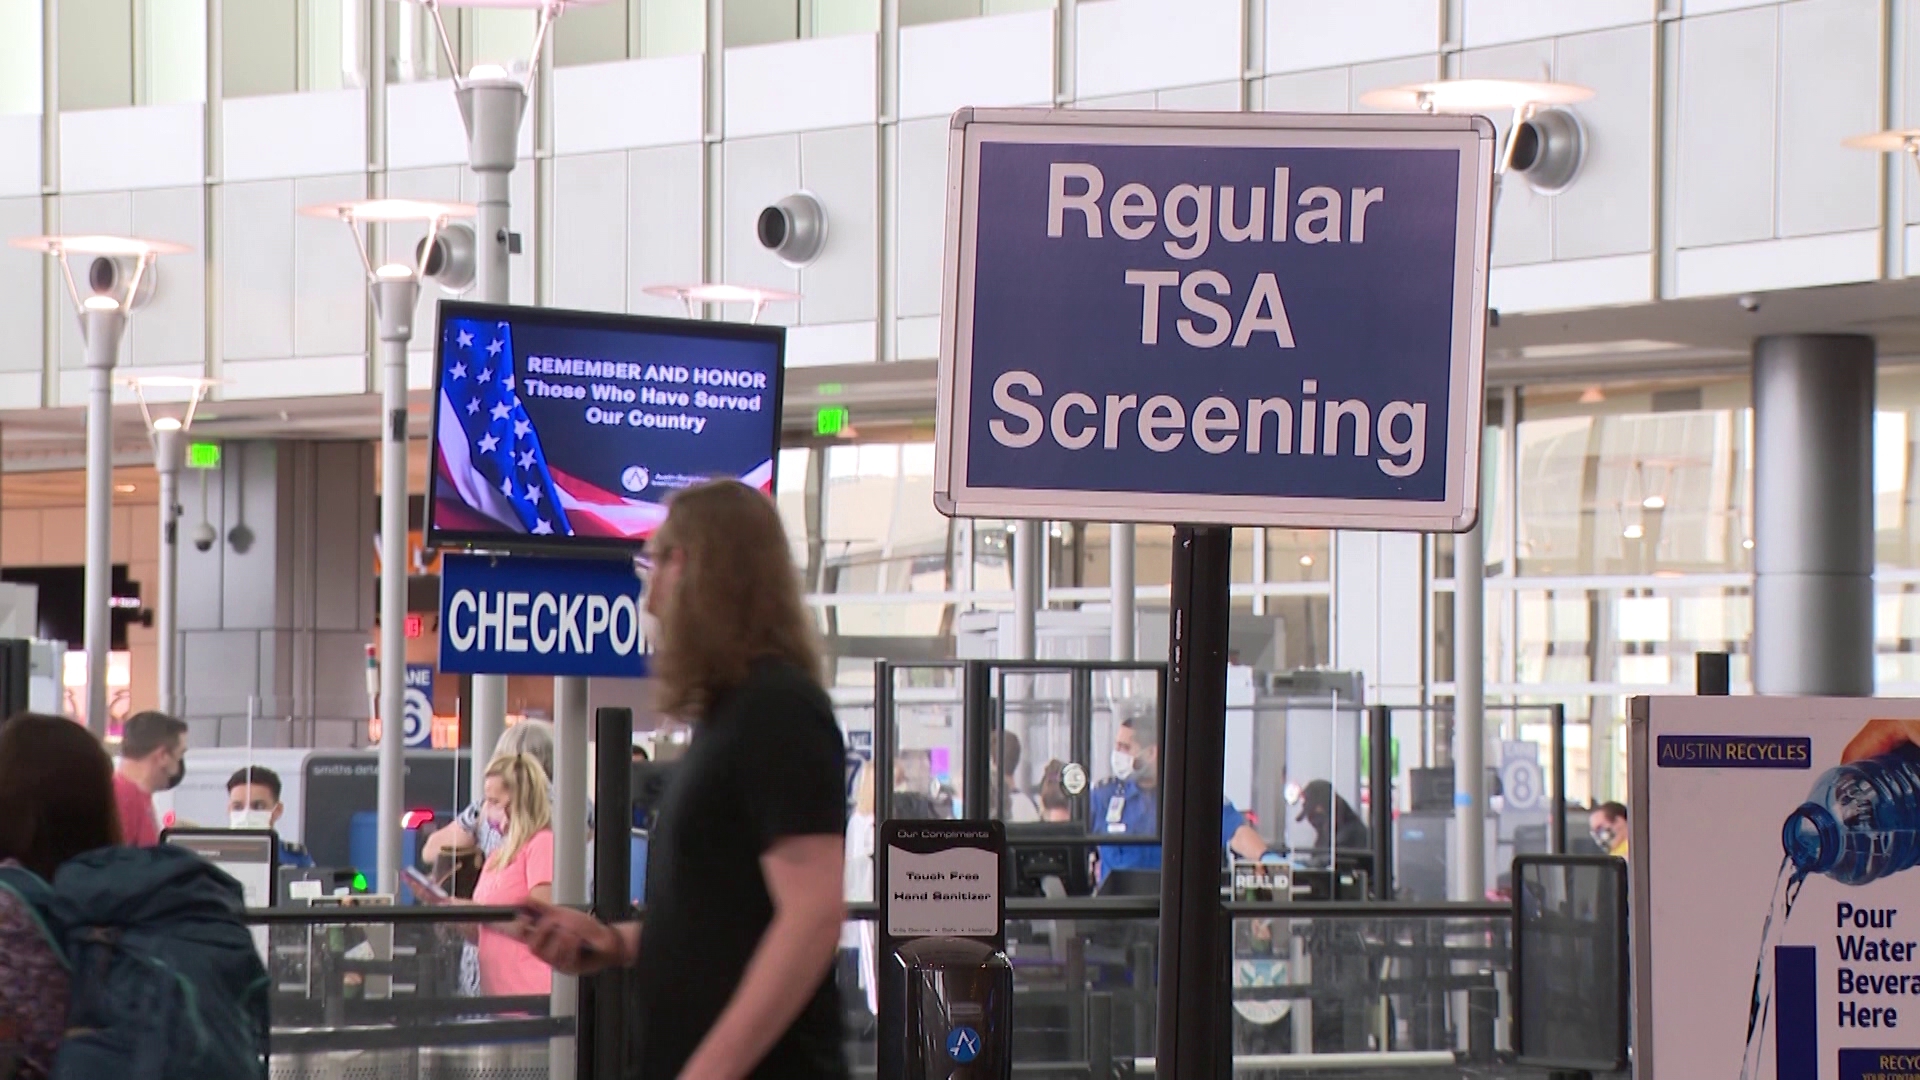 TSA PreCheck and CLEAR Screening customers will see some changes at Austin's airport starting Wednesday.